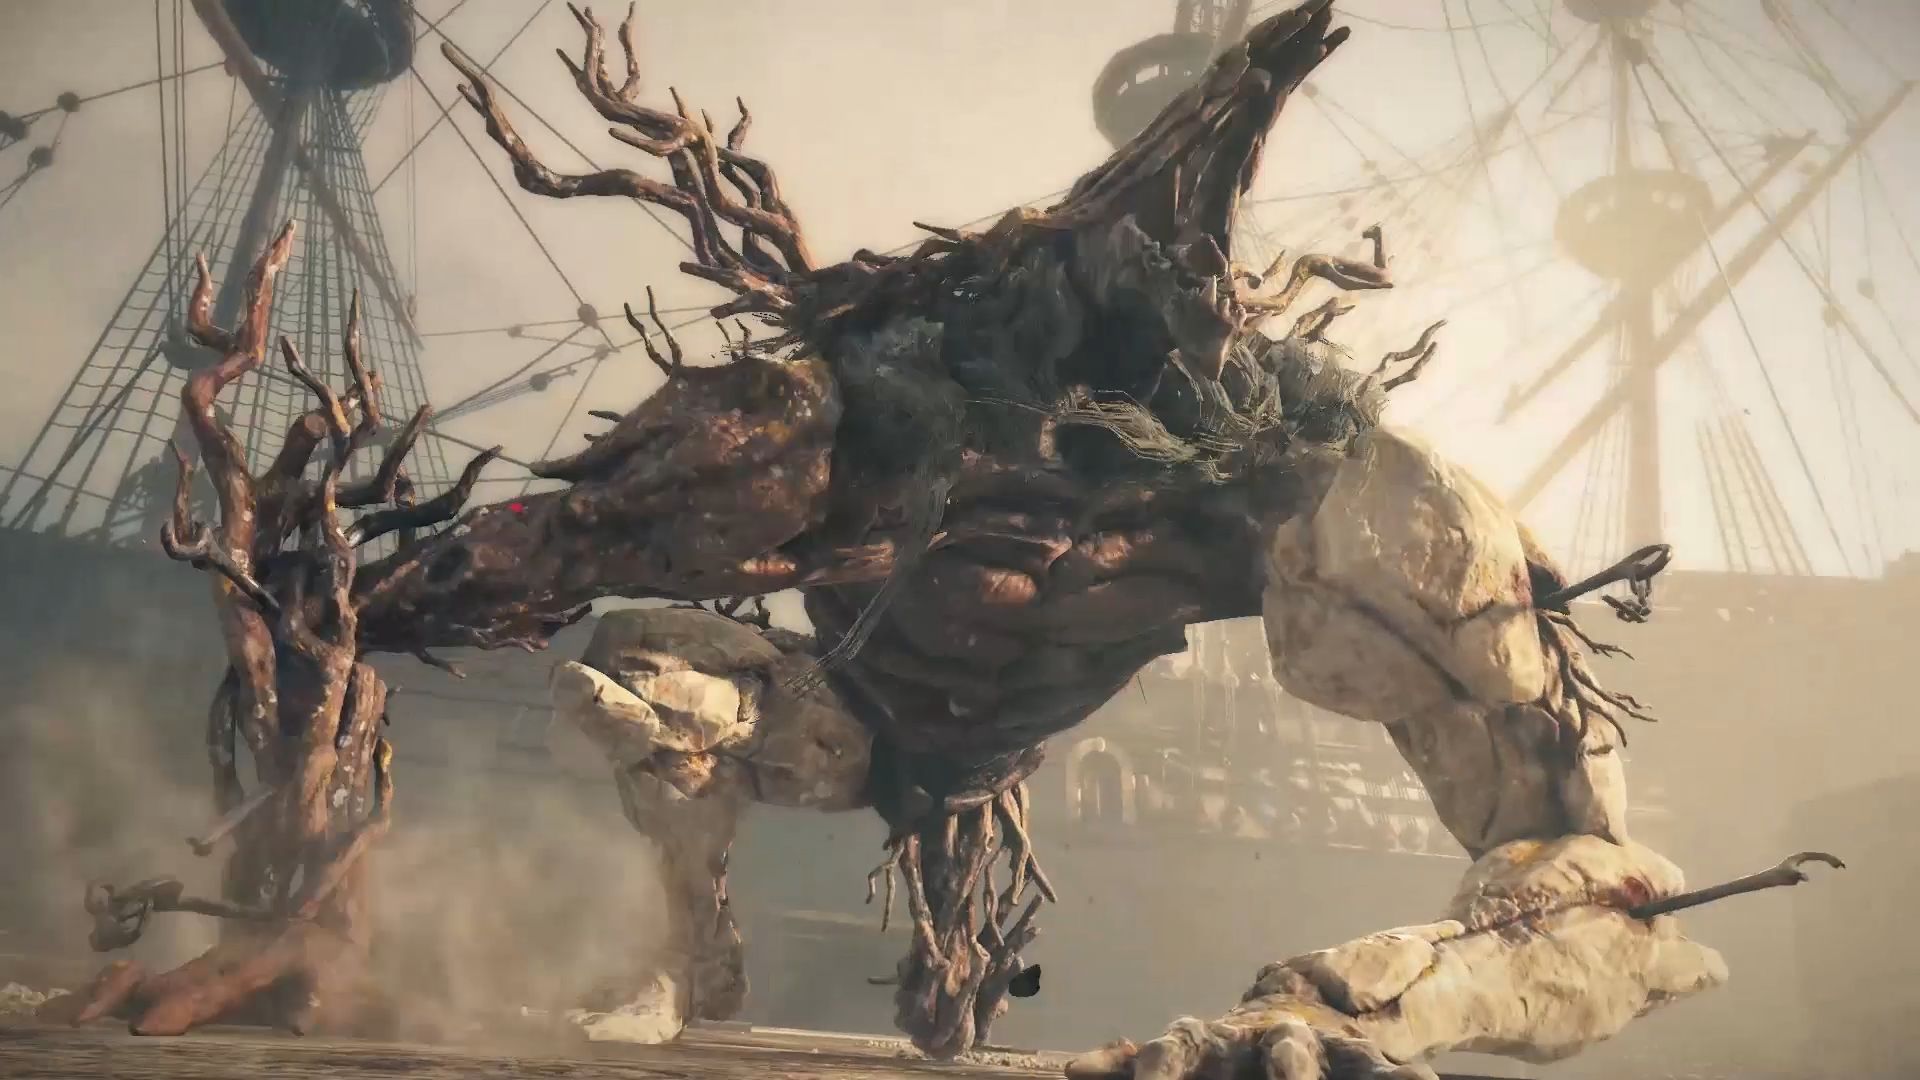 GreedFall Impressions Review: A Different Kind of Fantasy RPG